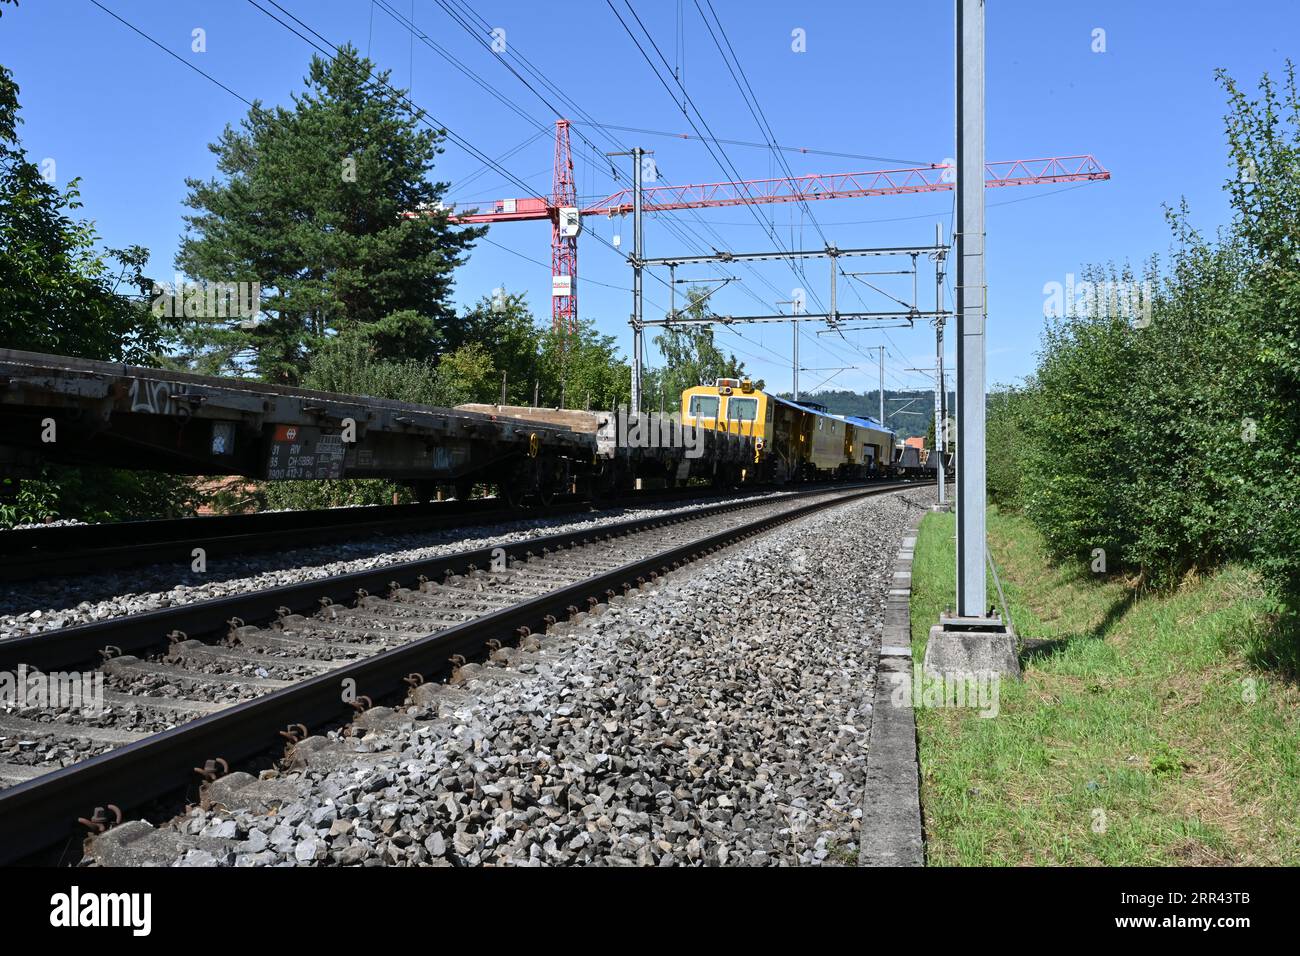 A freight train with railway carriages loaded with concrete sleepers stands on the rails leading to Urdorf station in Switzerland. Stock Photo